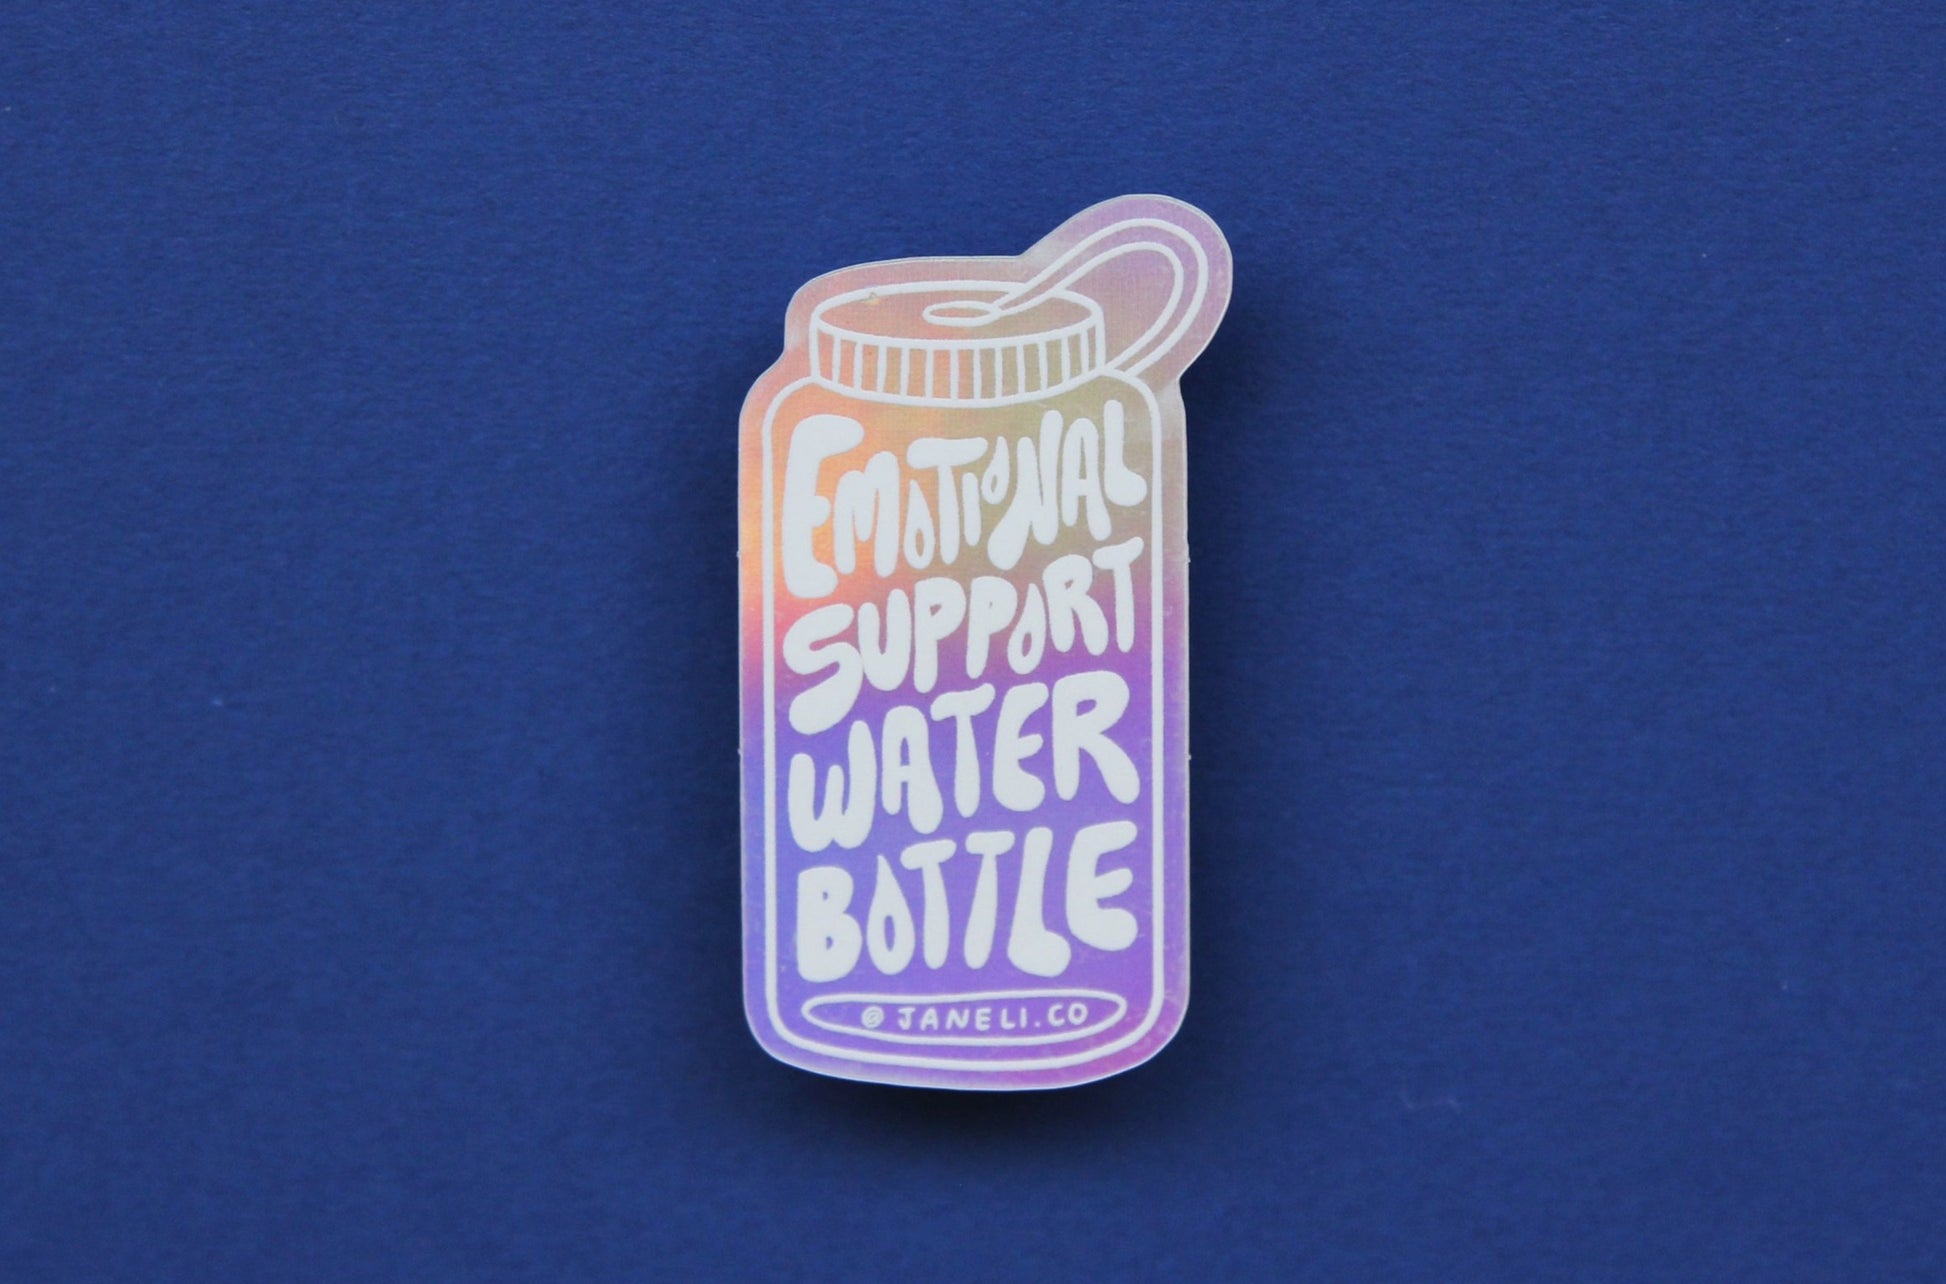 A holographic JaneLi.Co sticker that says "Emotional Support Water Bottle" in the shape of a water bottle over a navy blue background.